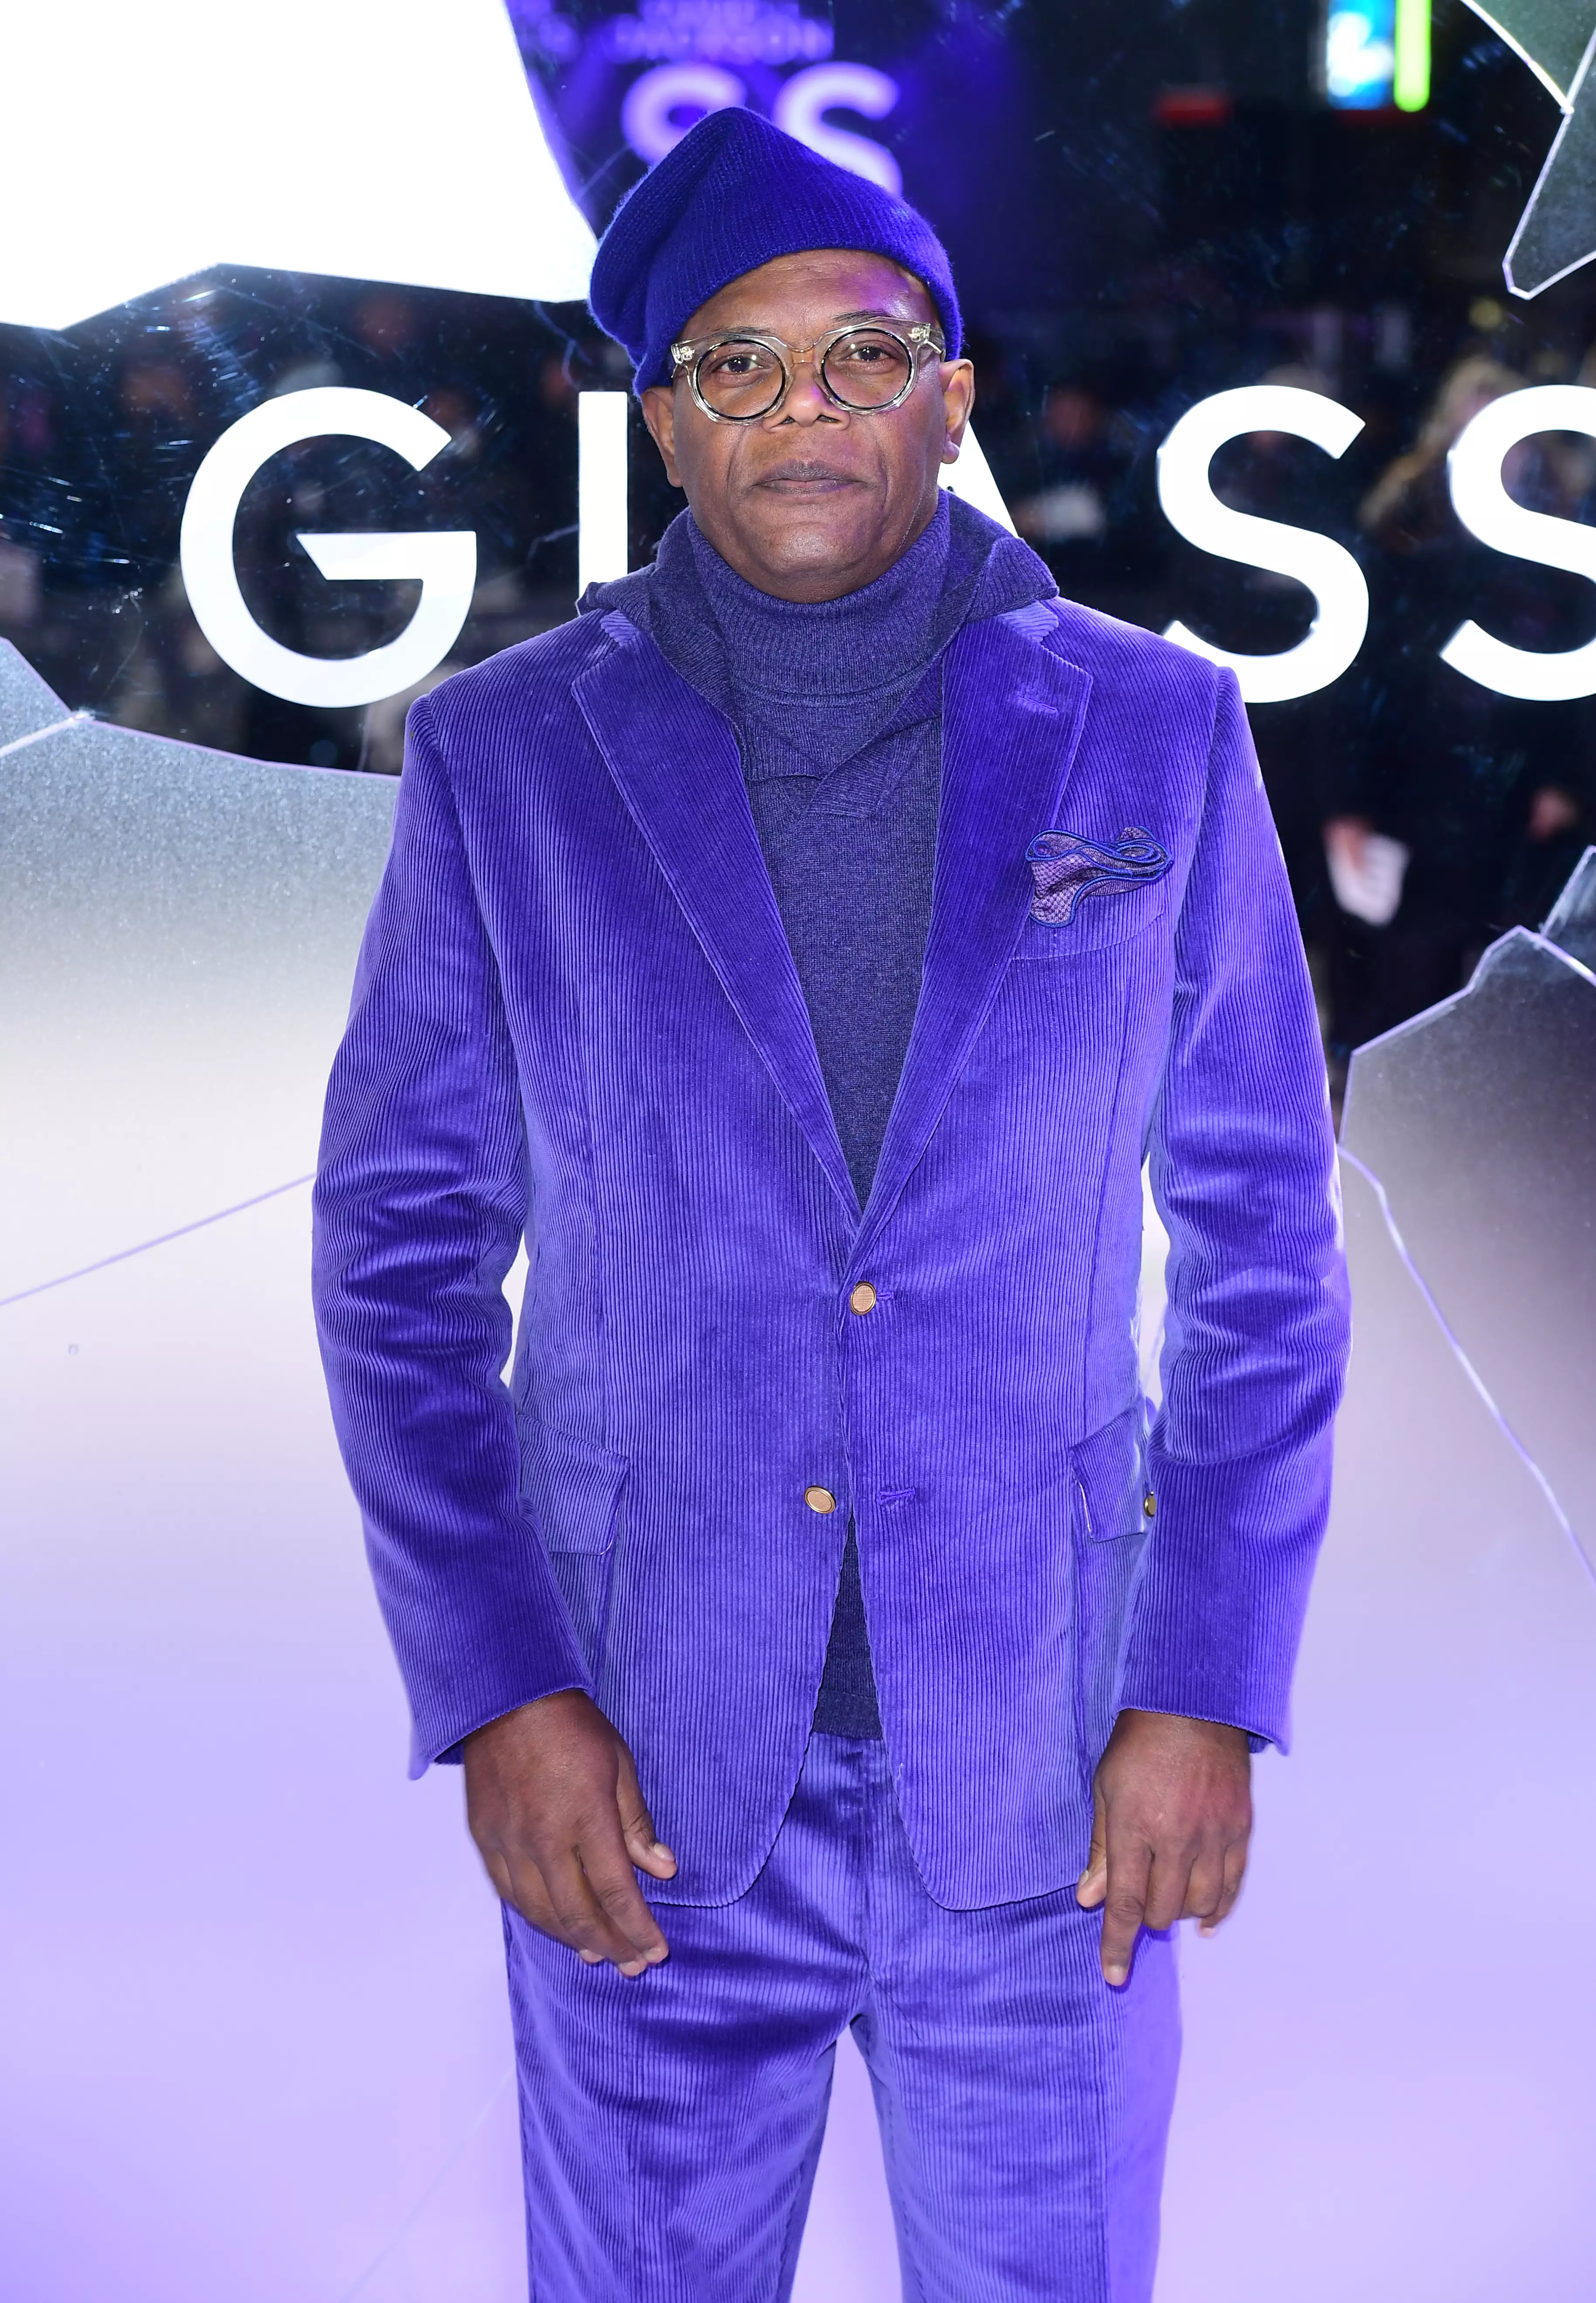 Samuel L. Jackson would be well up for a part in Luther or Peaky Blinders.